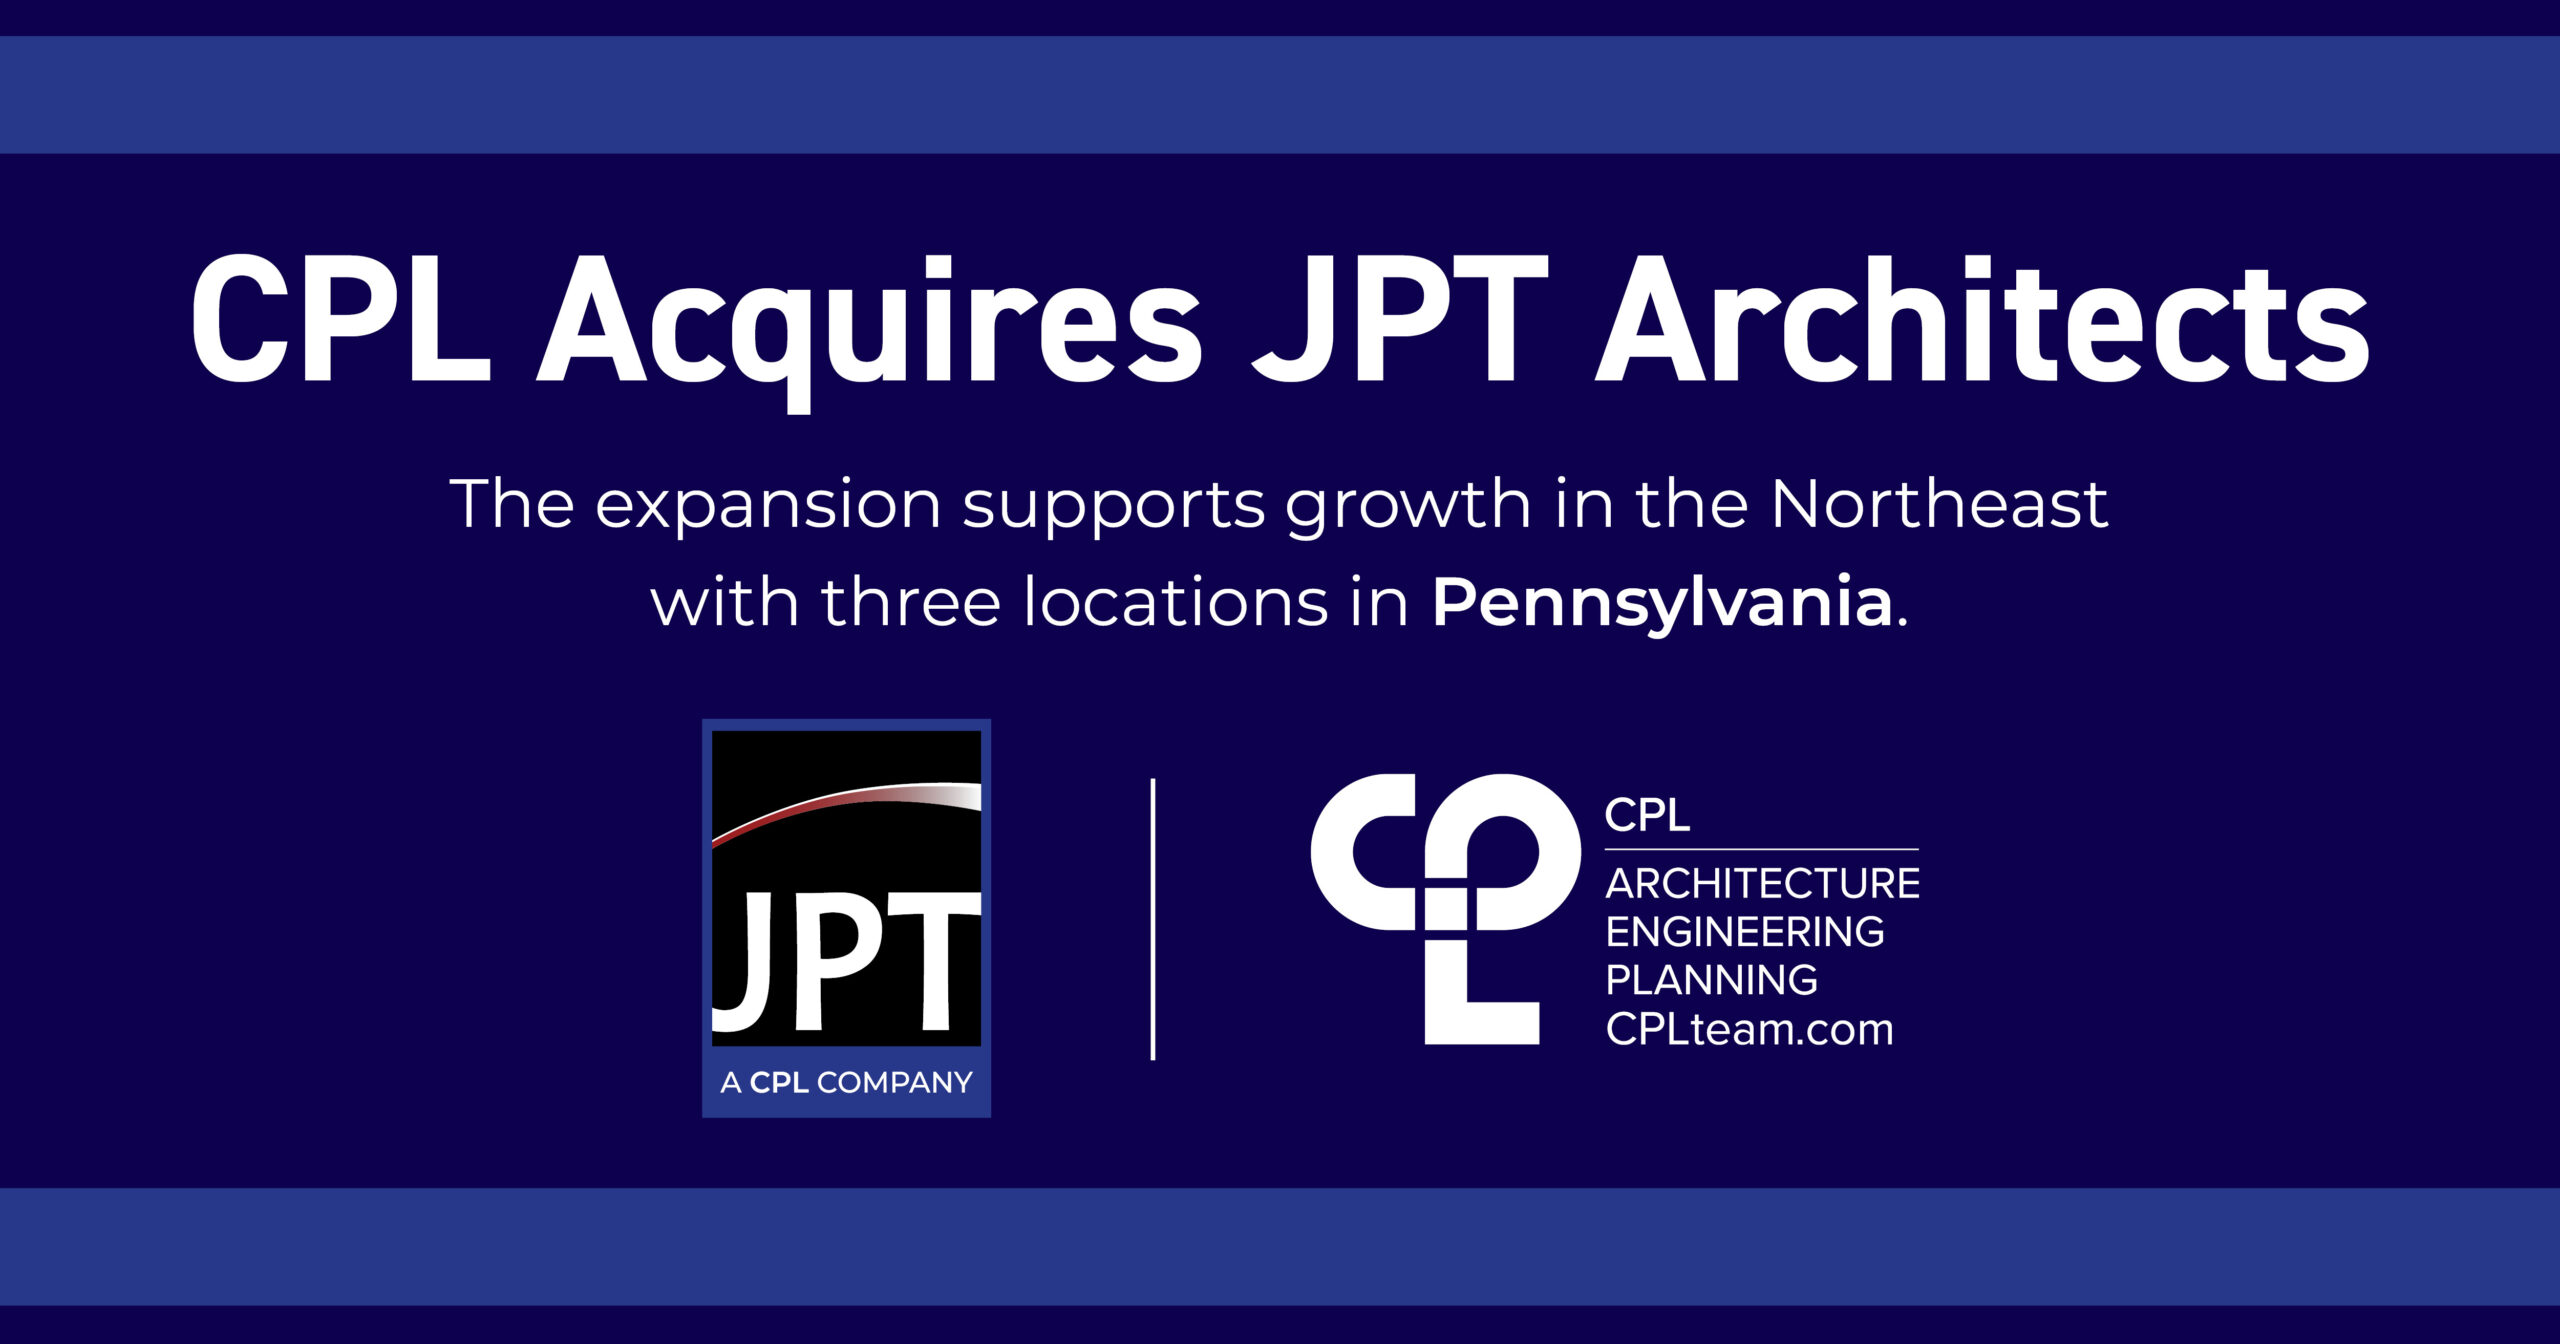 CPL Acquires JPT Architects